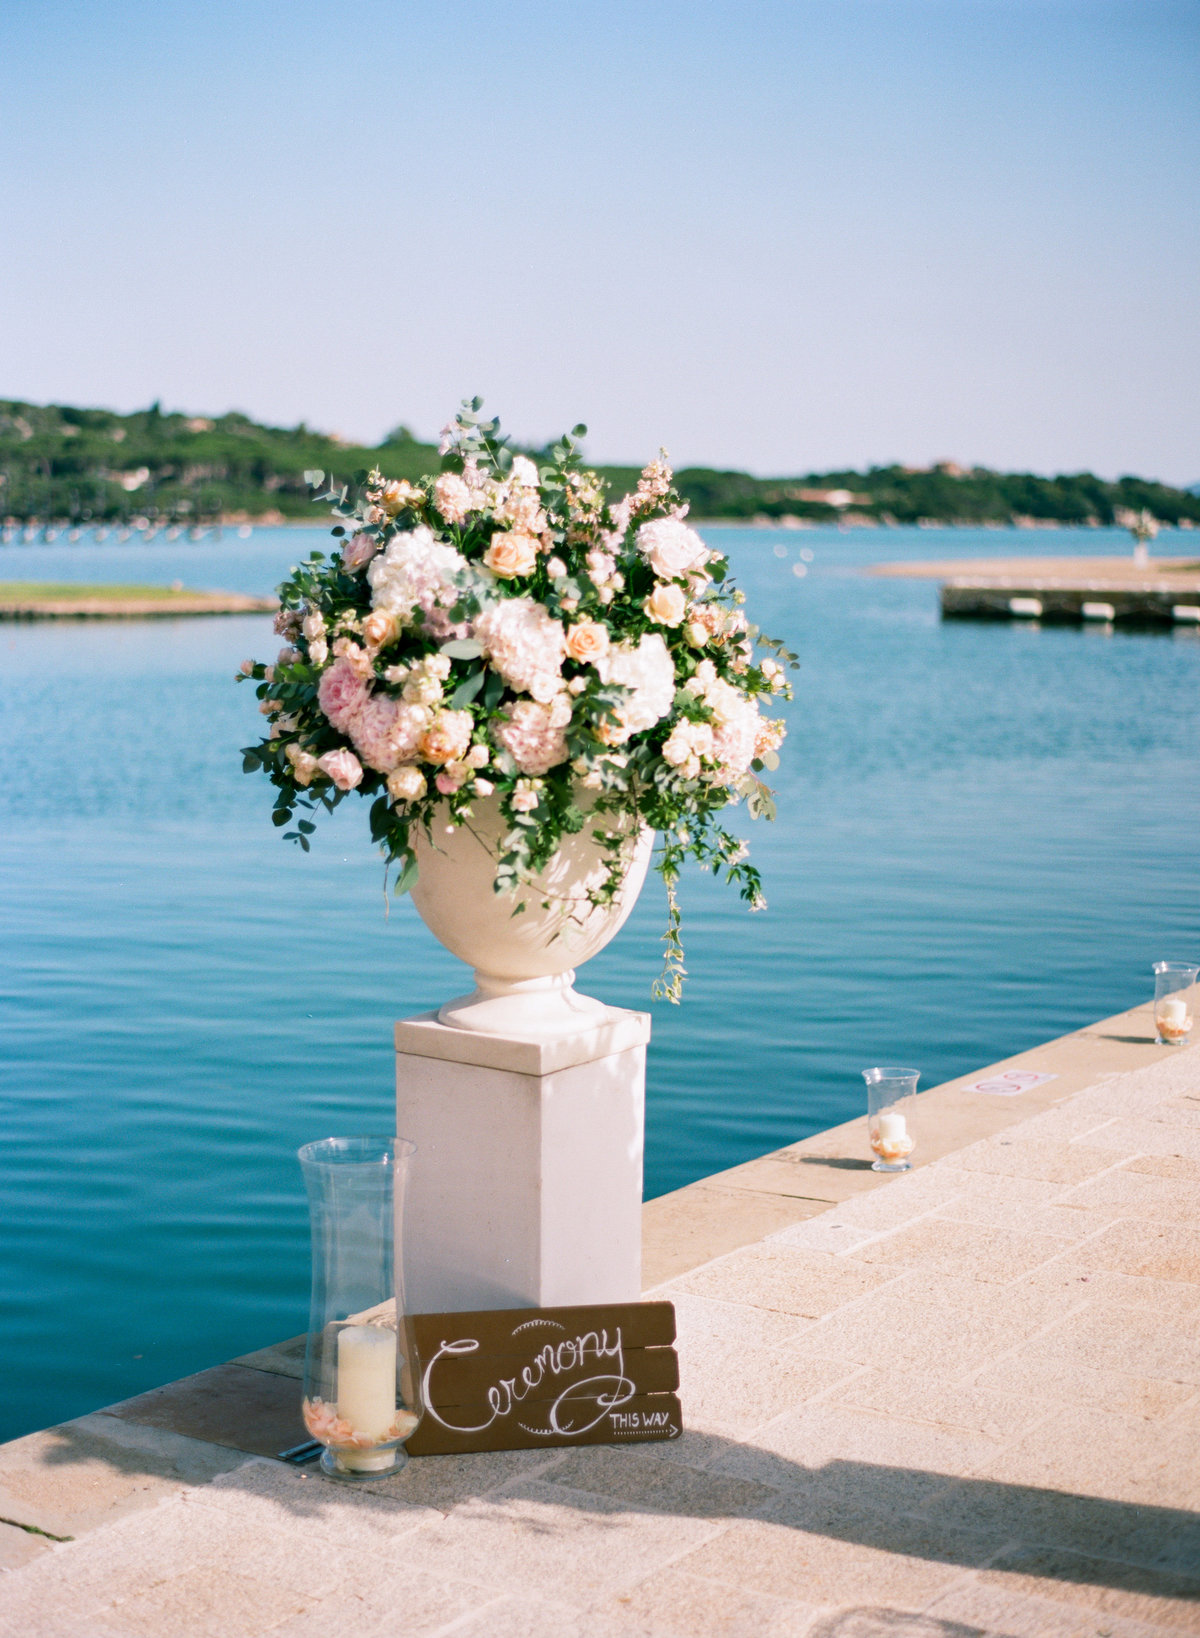 Flowers and decors details for luxury wedding at cala di volpe sardinia